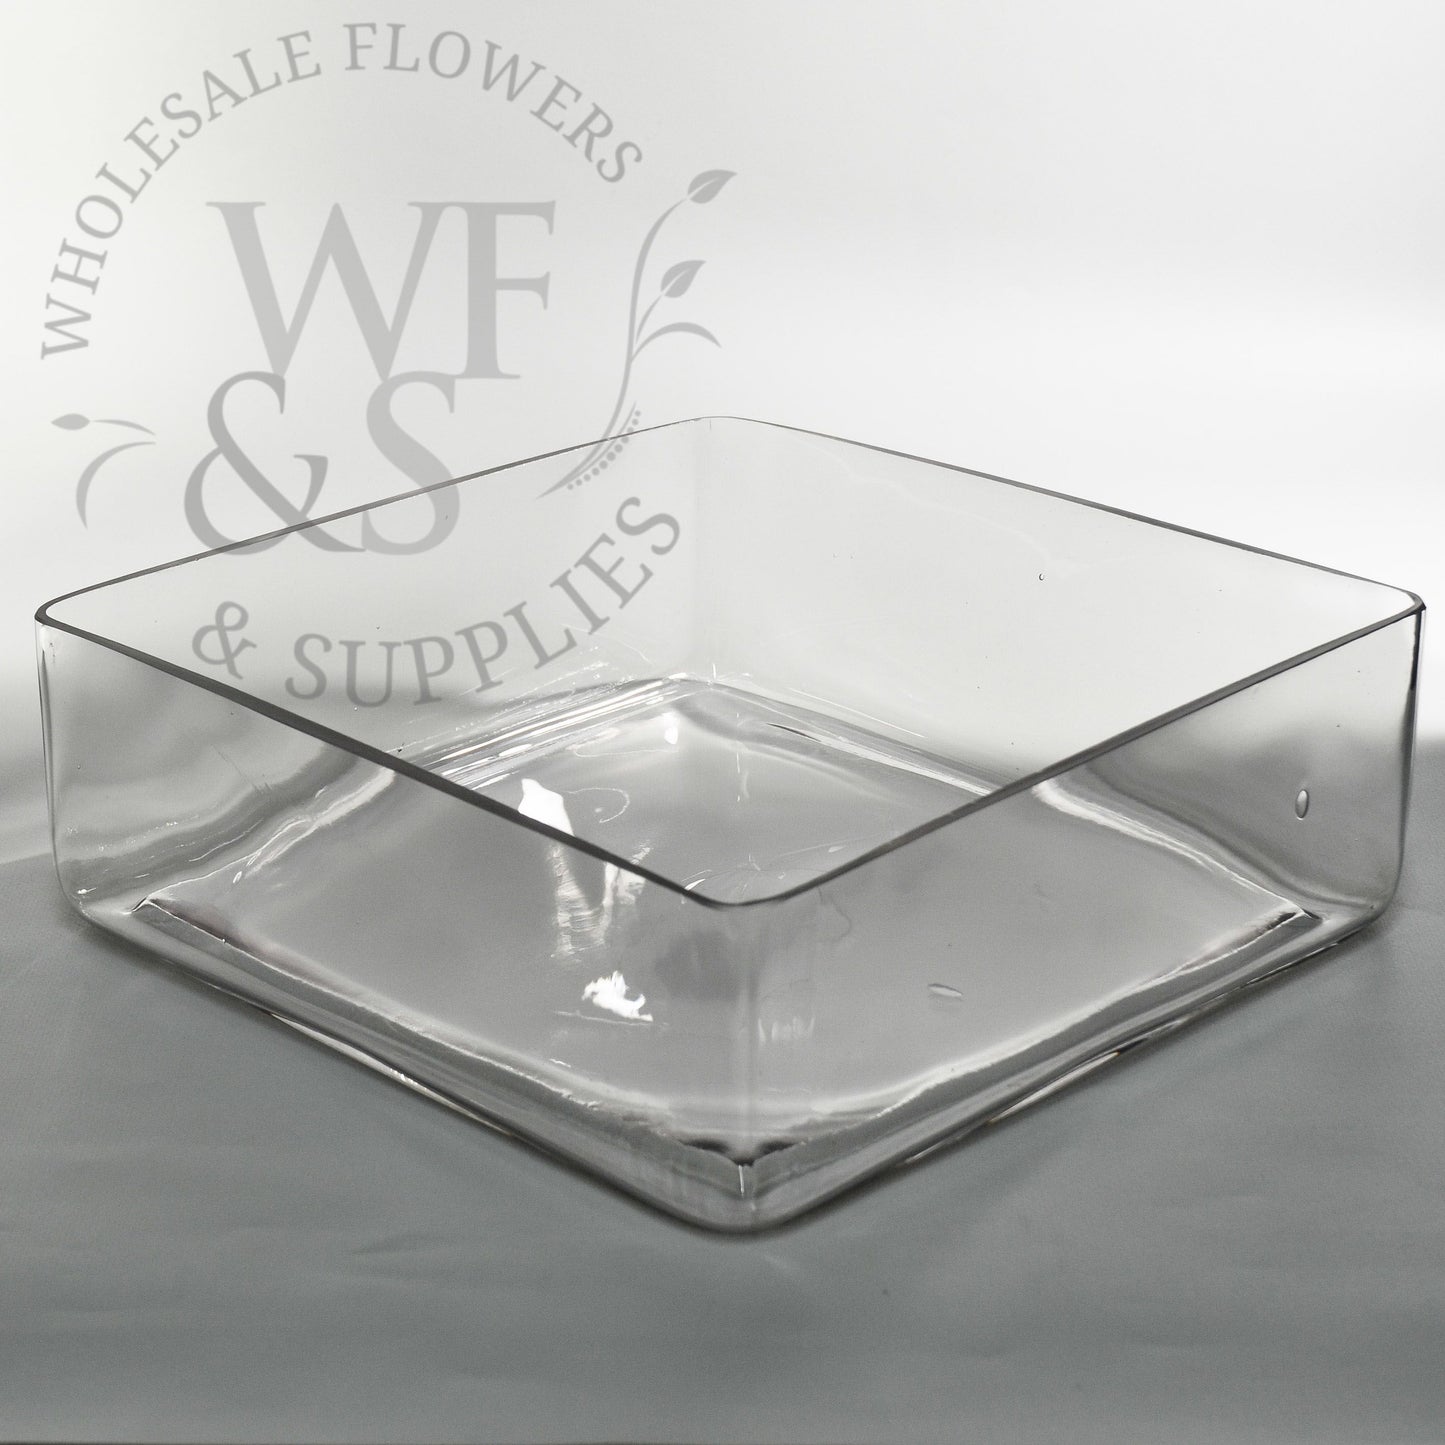 Low Glass Square Block Vases Dish Garden 4x12x12 - Discontinued